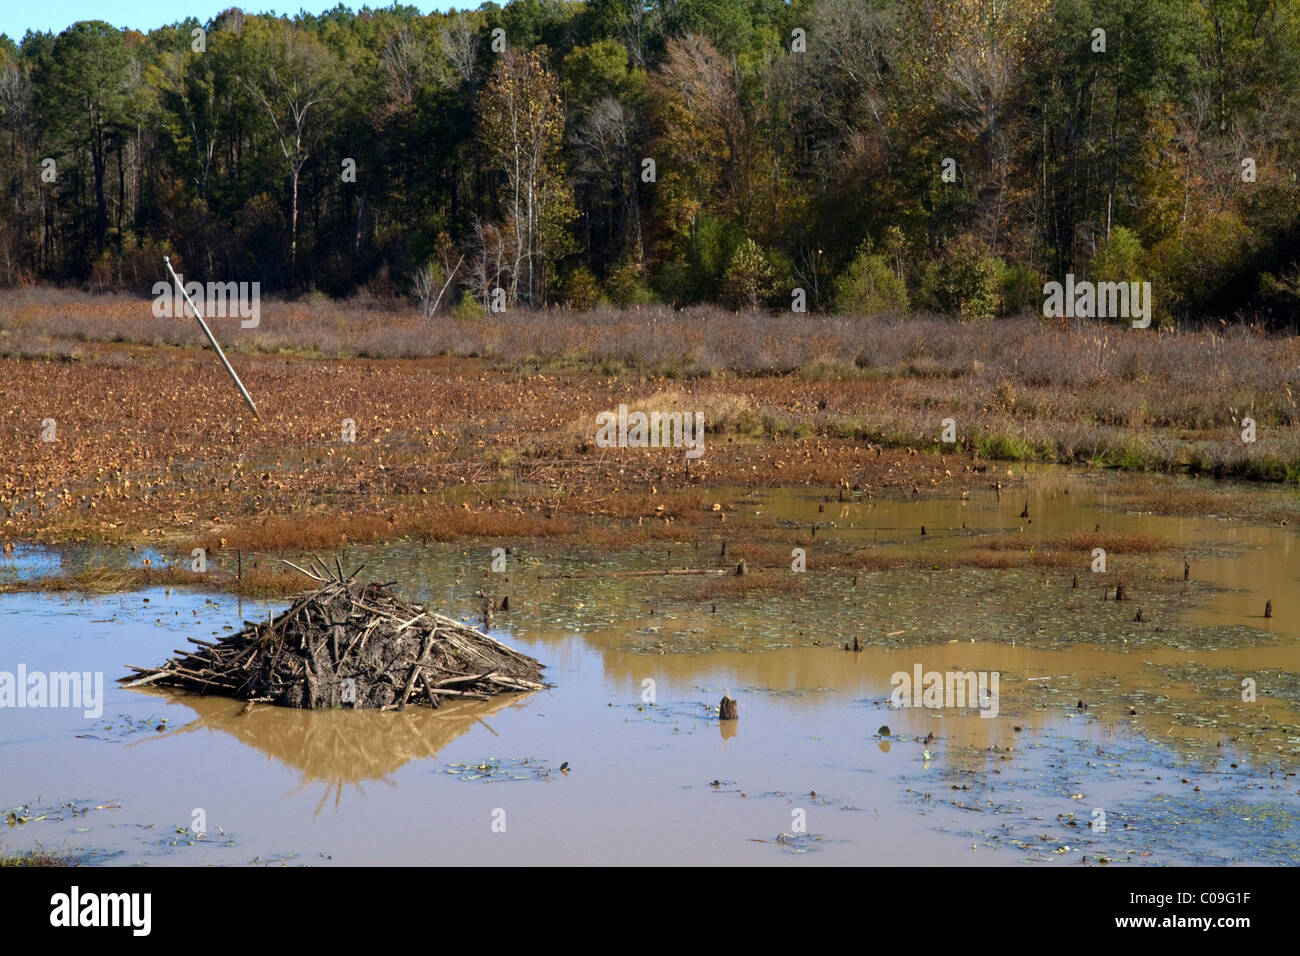 Beaver lodge in a swamp along the Tombigbee River north of Tupelo Mississippi, USA. Stock Photo